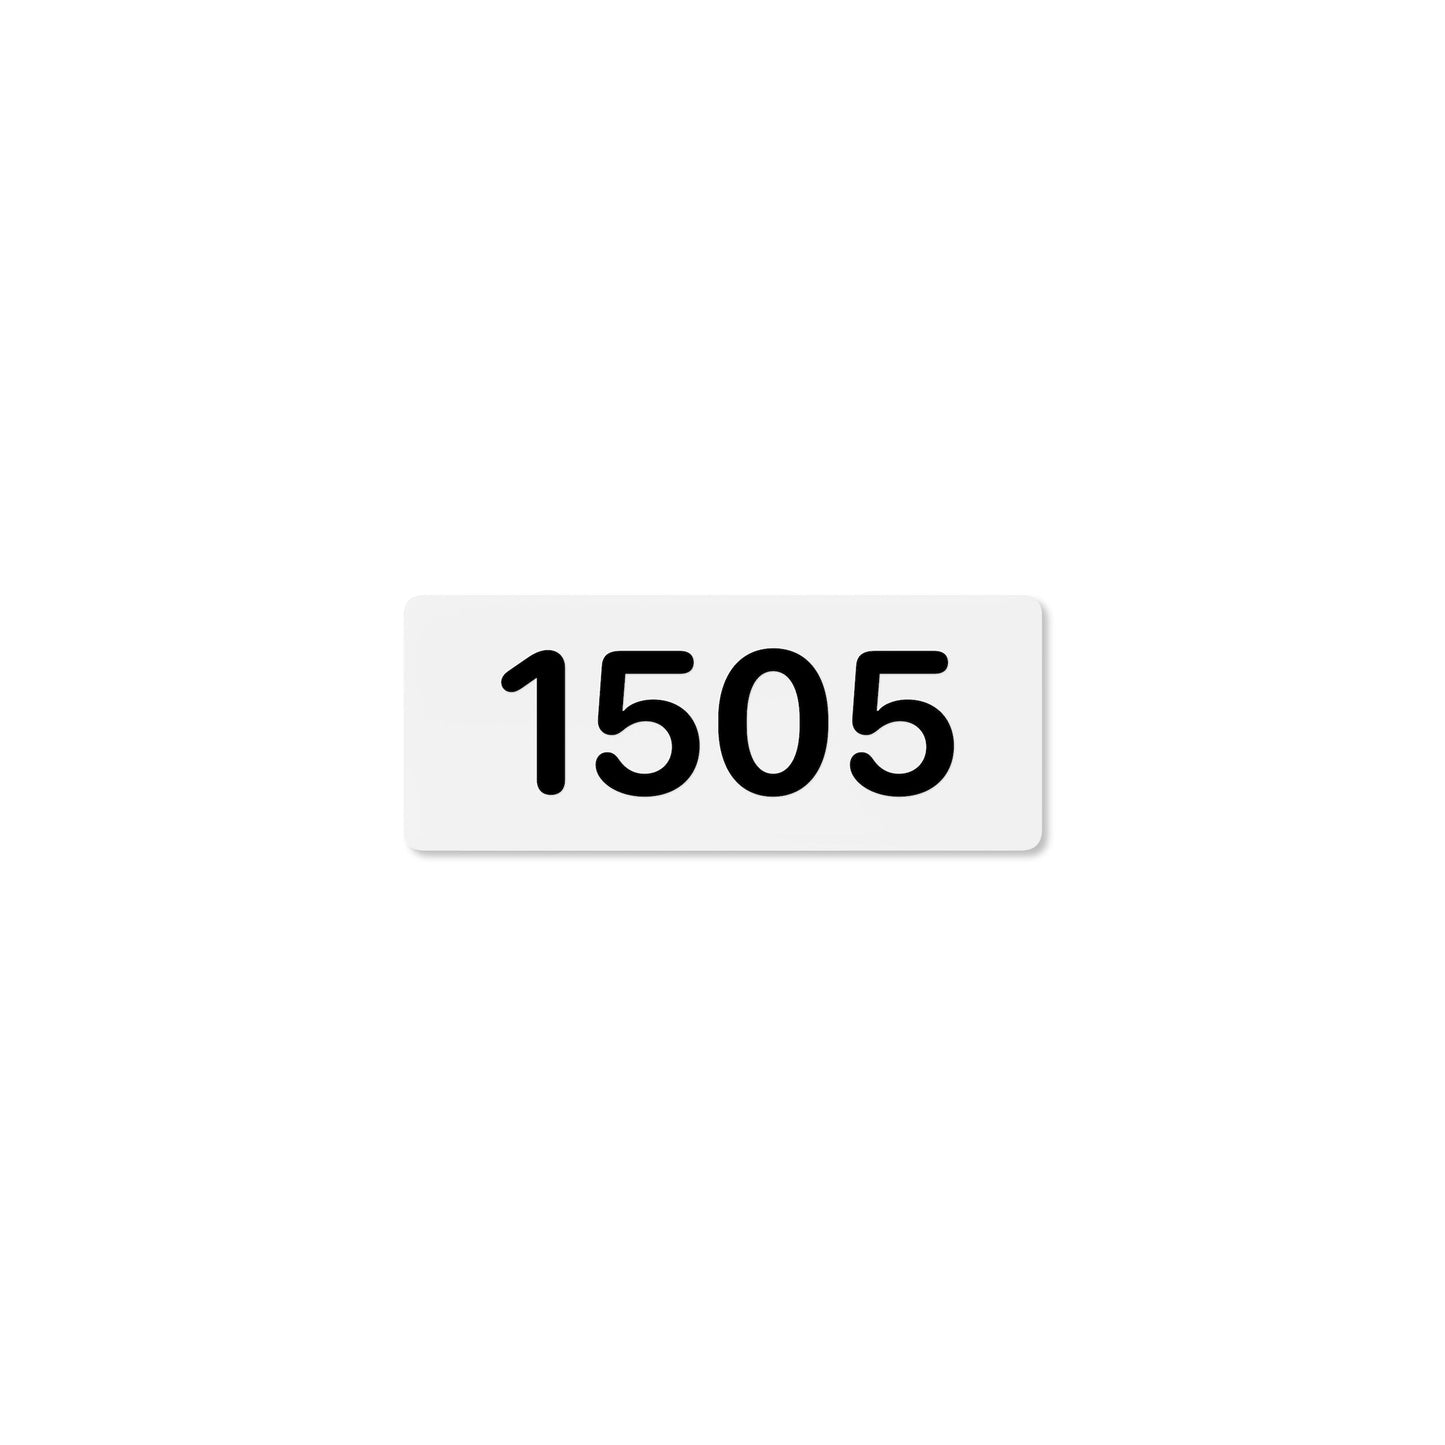 Numeral 1505